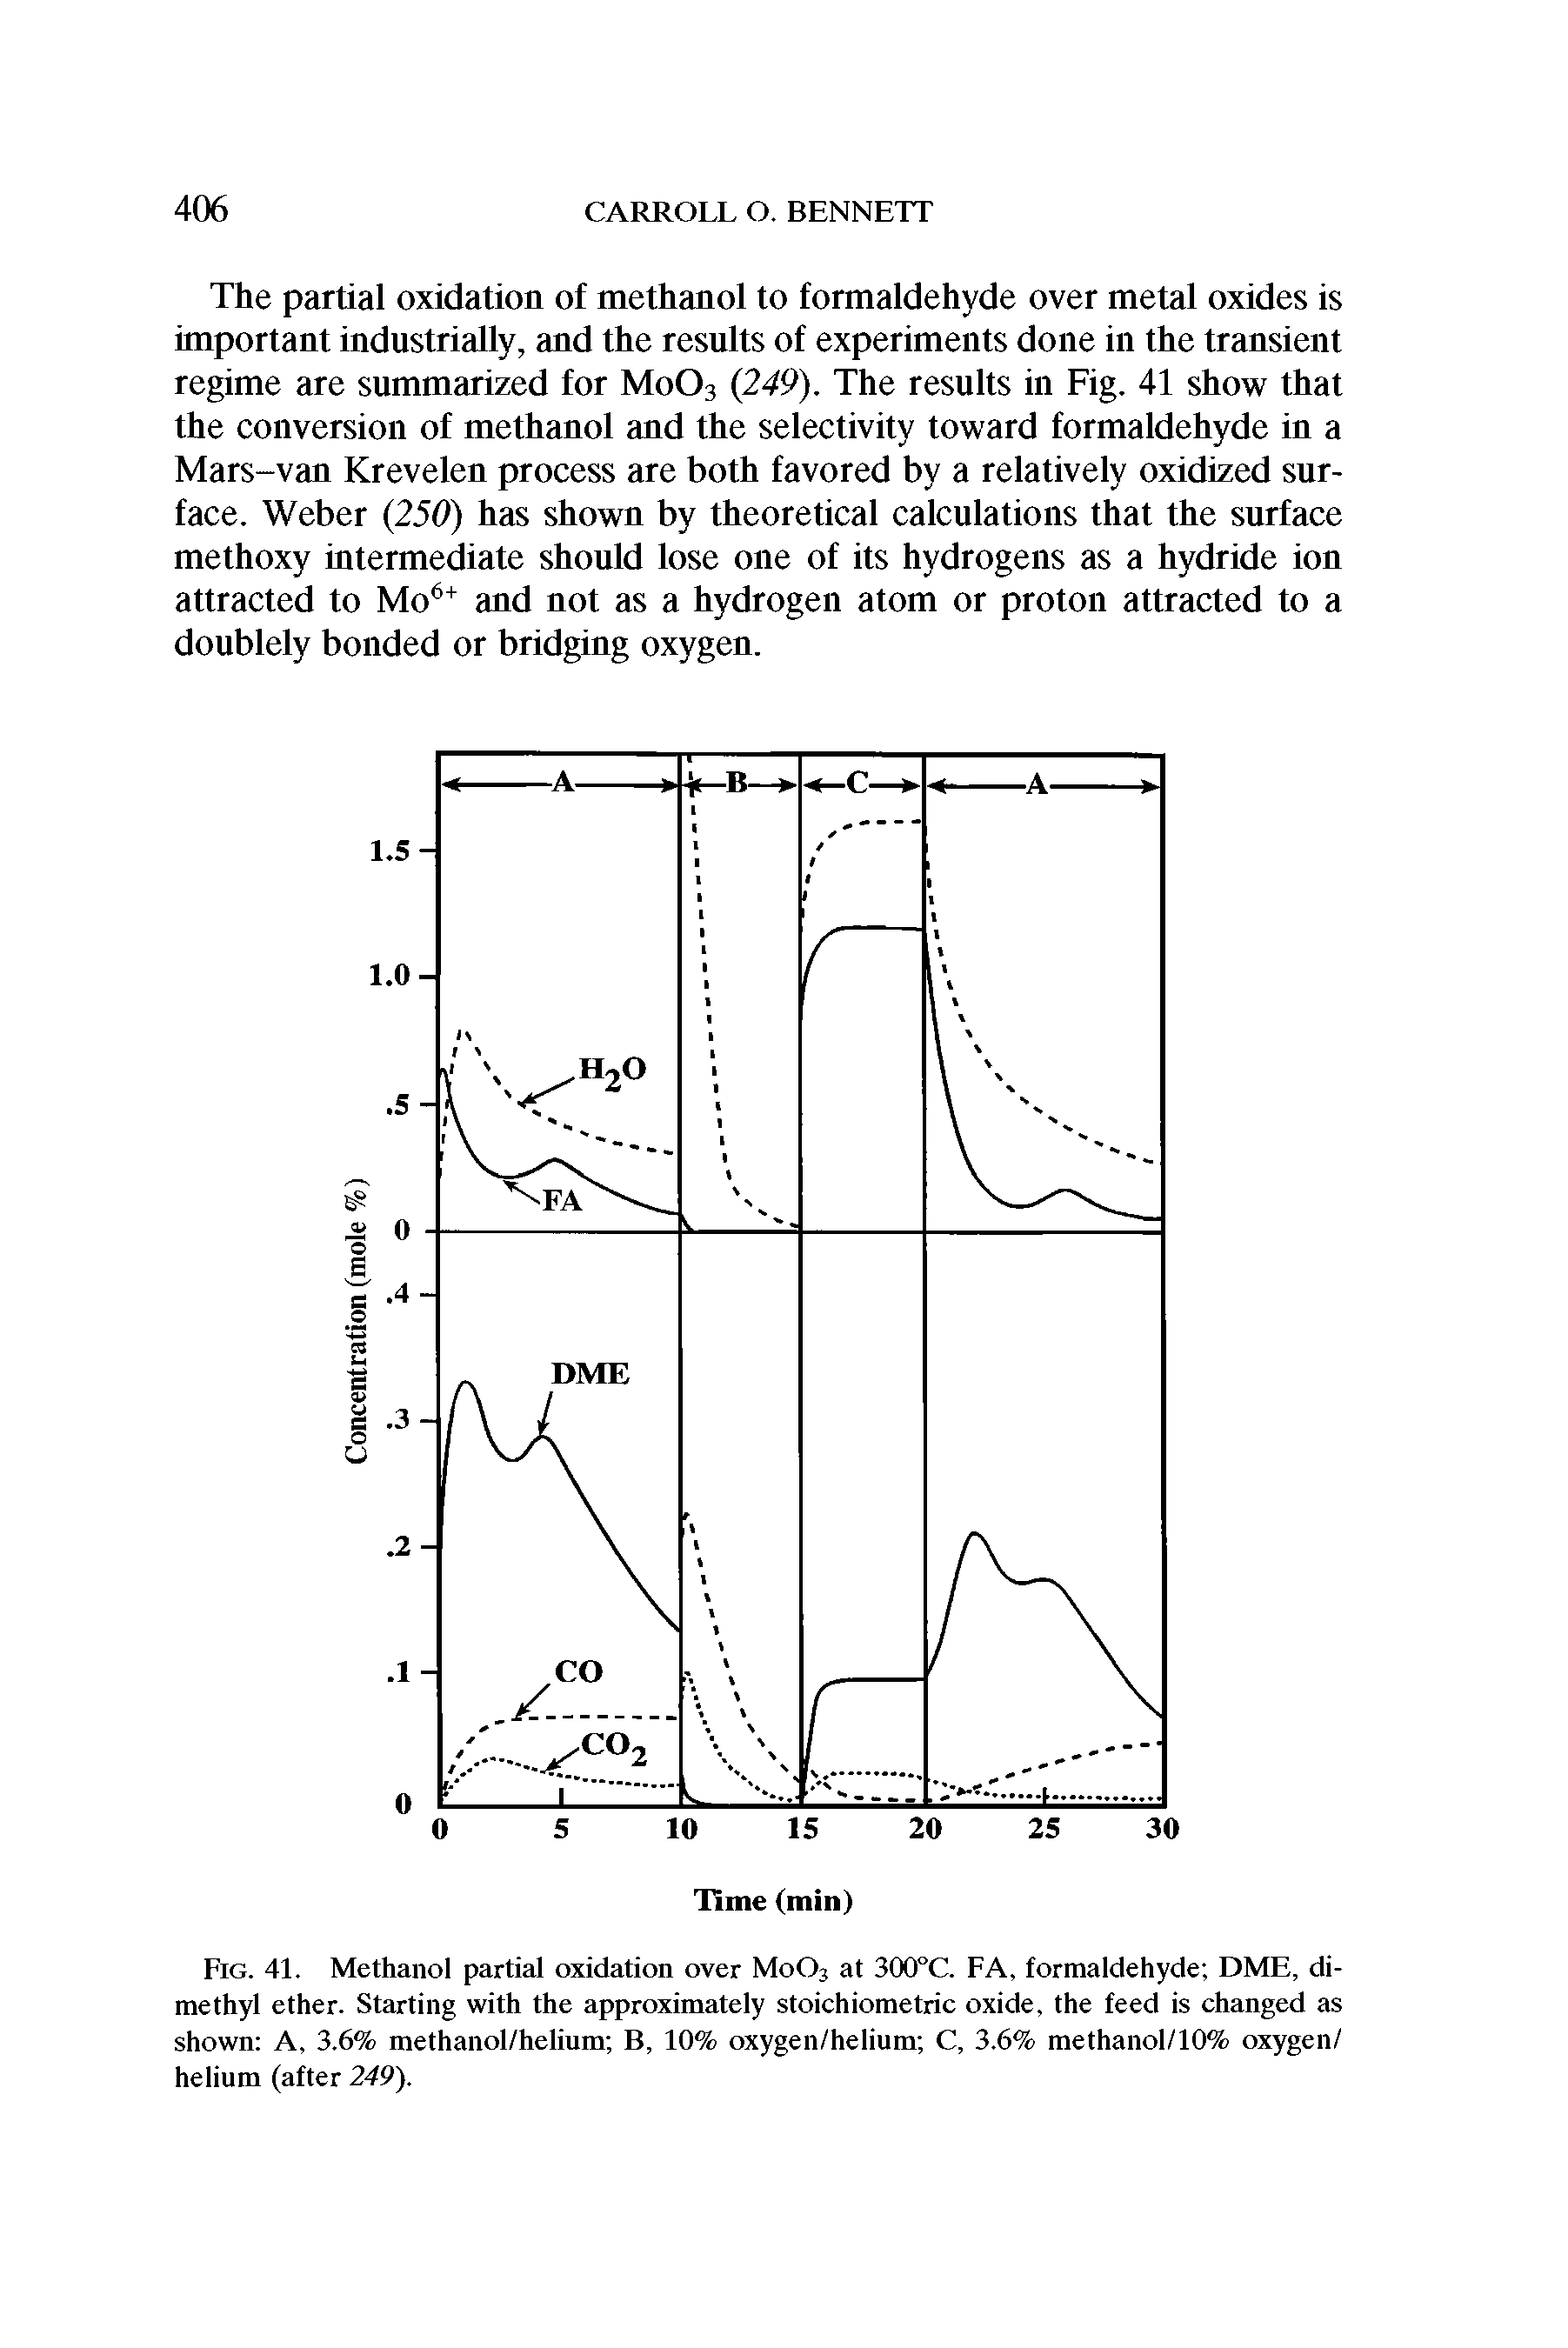 Fig. 41. Methanol partial oxidation over M0O3 at 300°C. FA, formaldehyde DME, dimethyl ether. Starting with the approximately stoichiometric oxide, the feed is changed as shown A, 3.6% methanol/helium B, 10% oxygen/helium C, 3.6% methanol/10% oxygen/ helium (after 249).